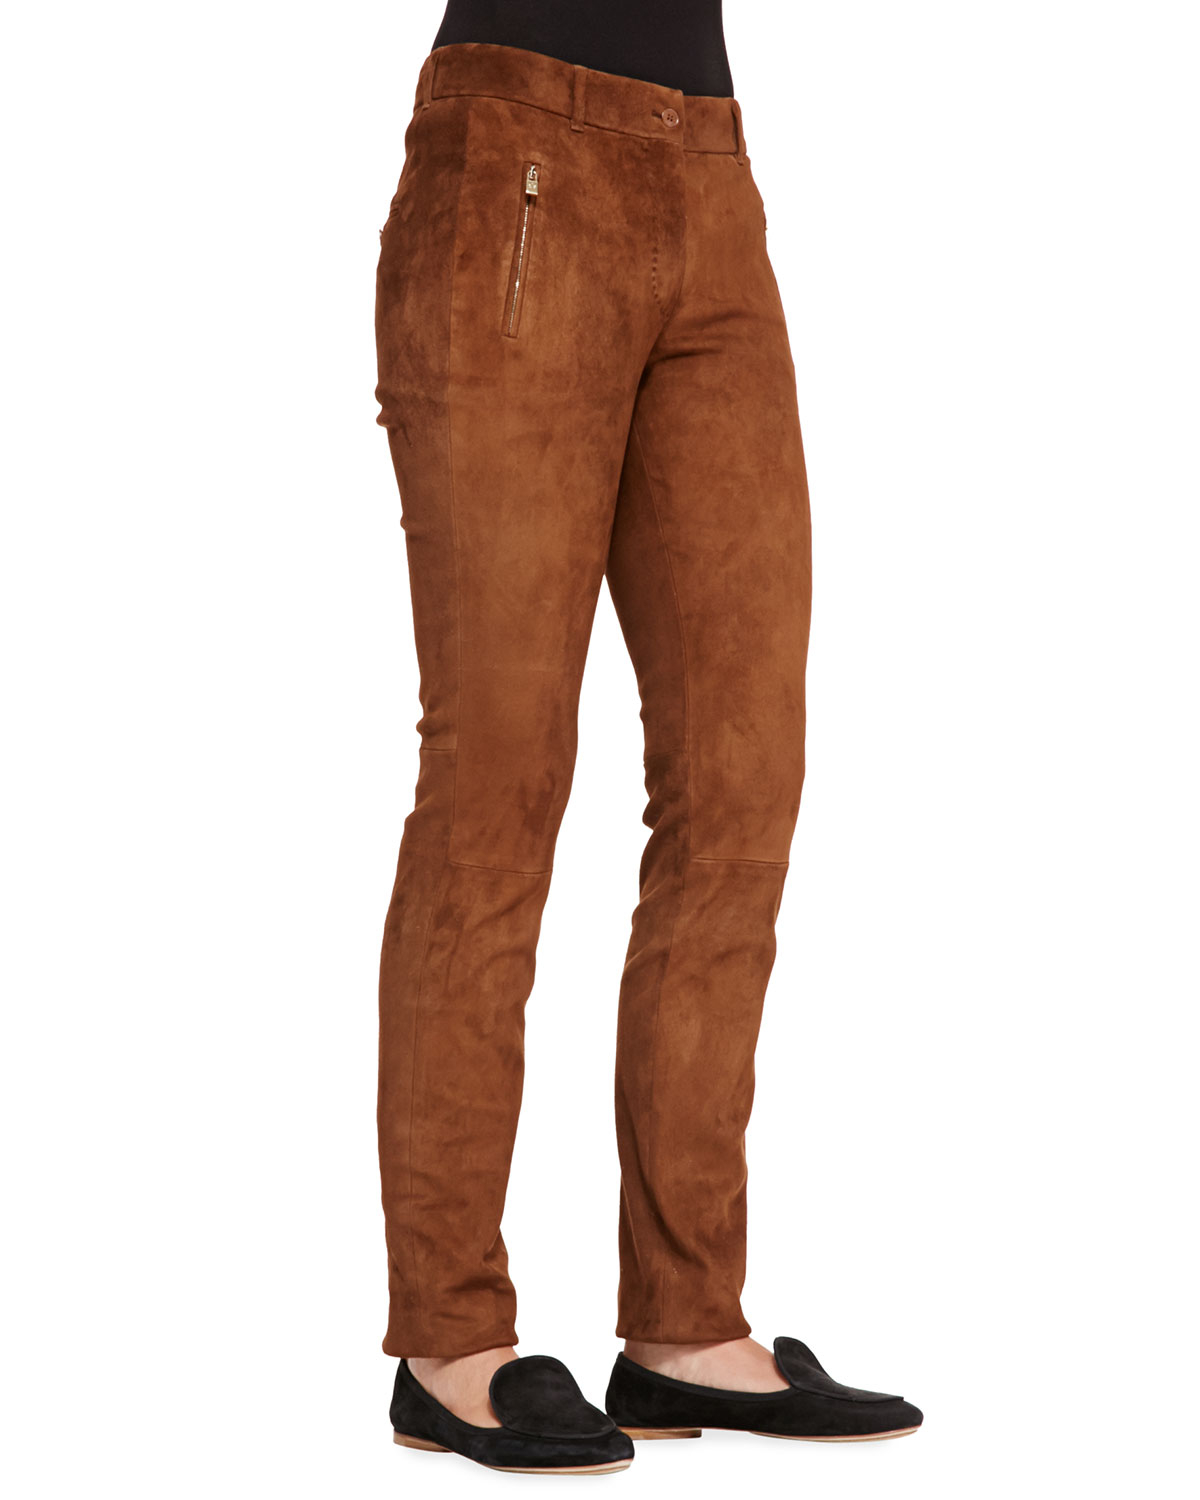 Lyst - Loro piana Ethan Stretch-suede Slim Pants in Brown